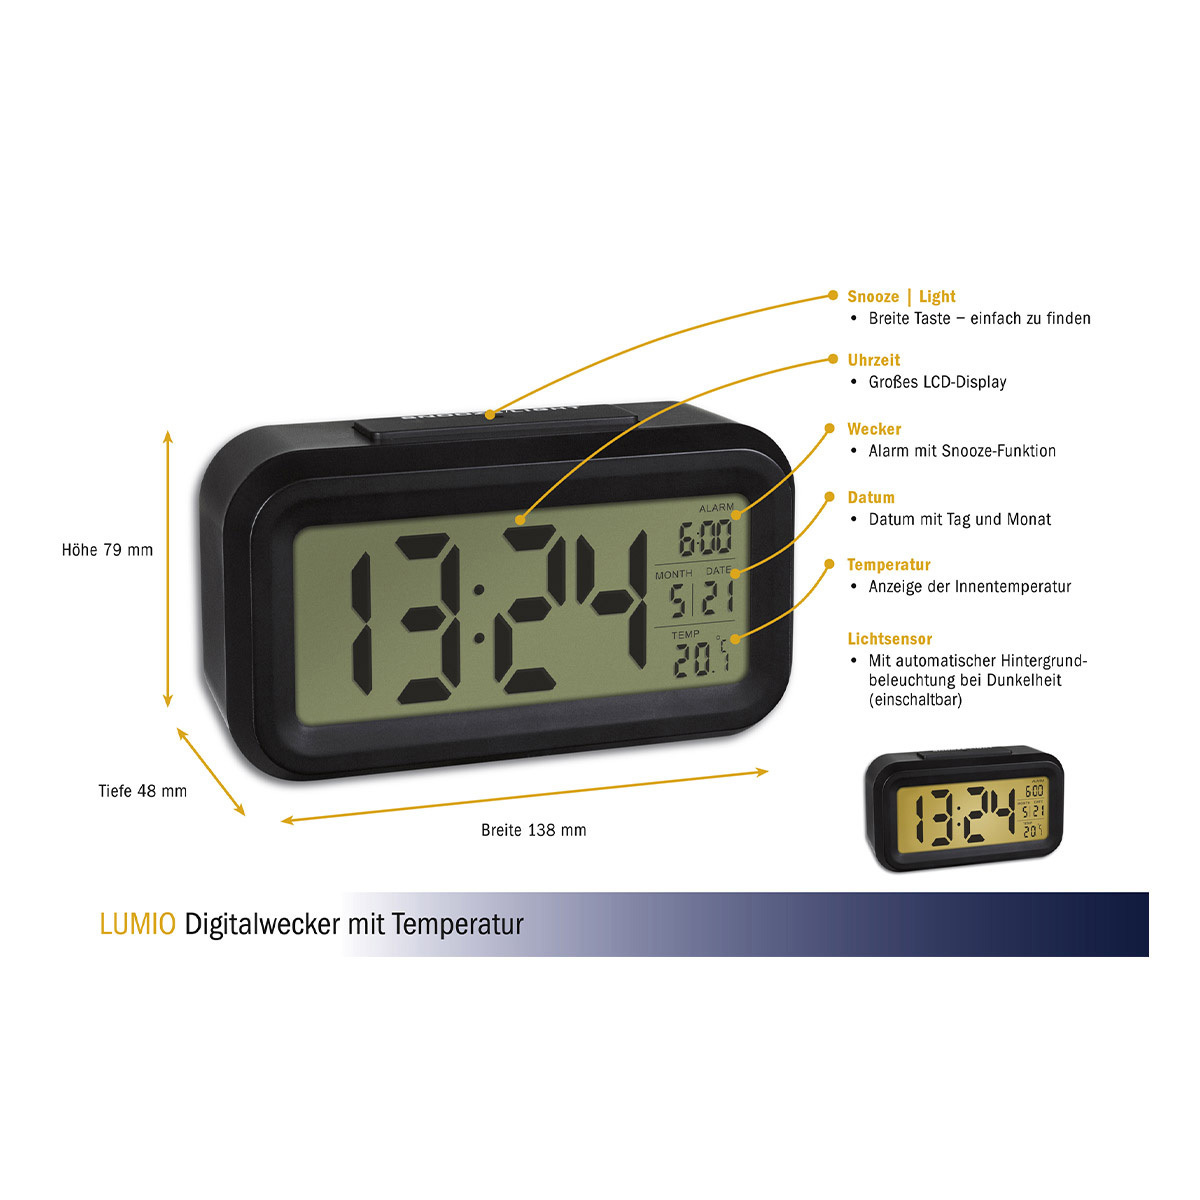 Lem Products Digital Thermometer with Alarm and Timer